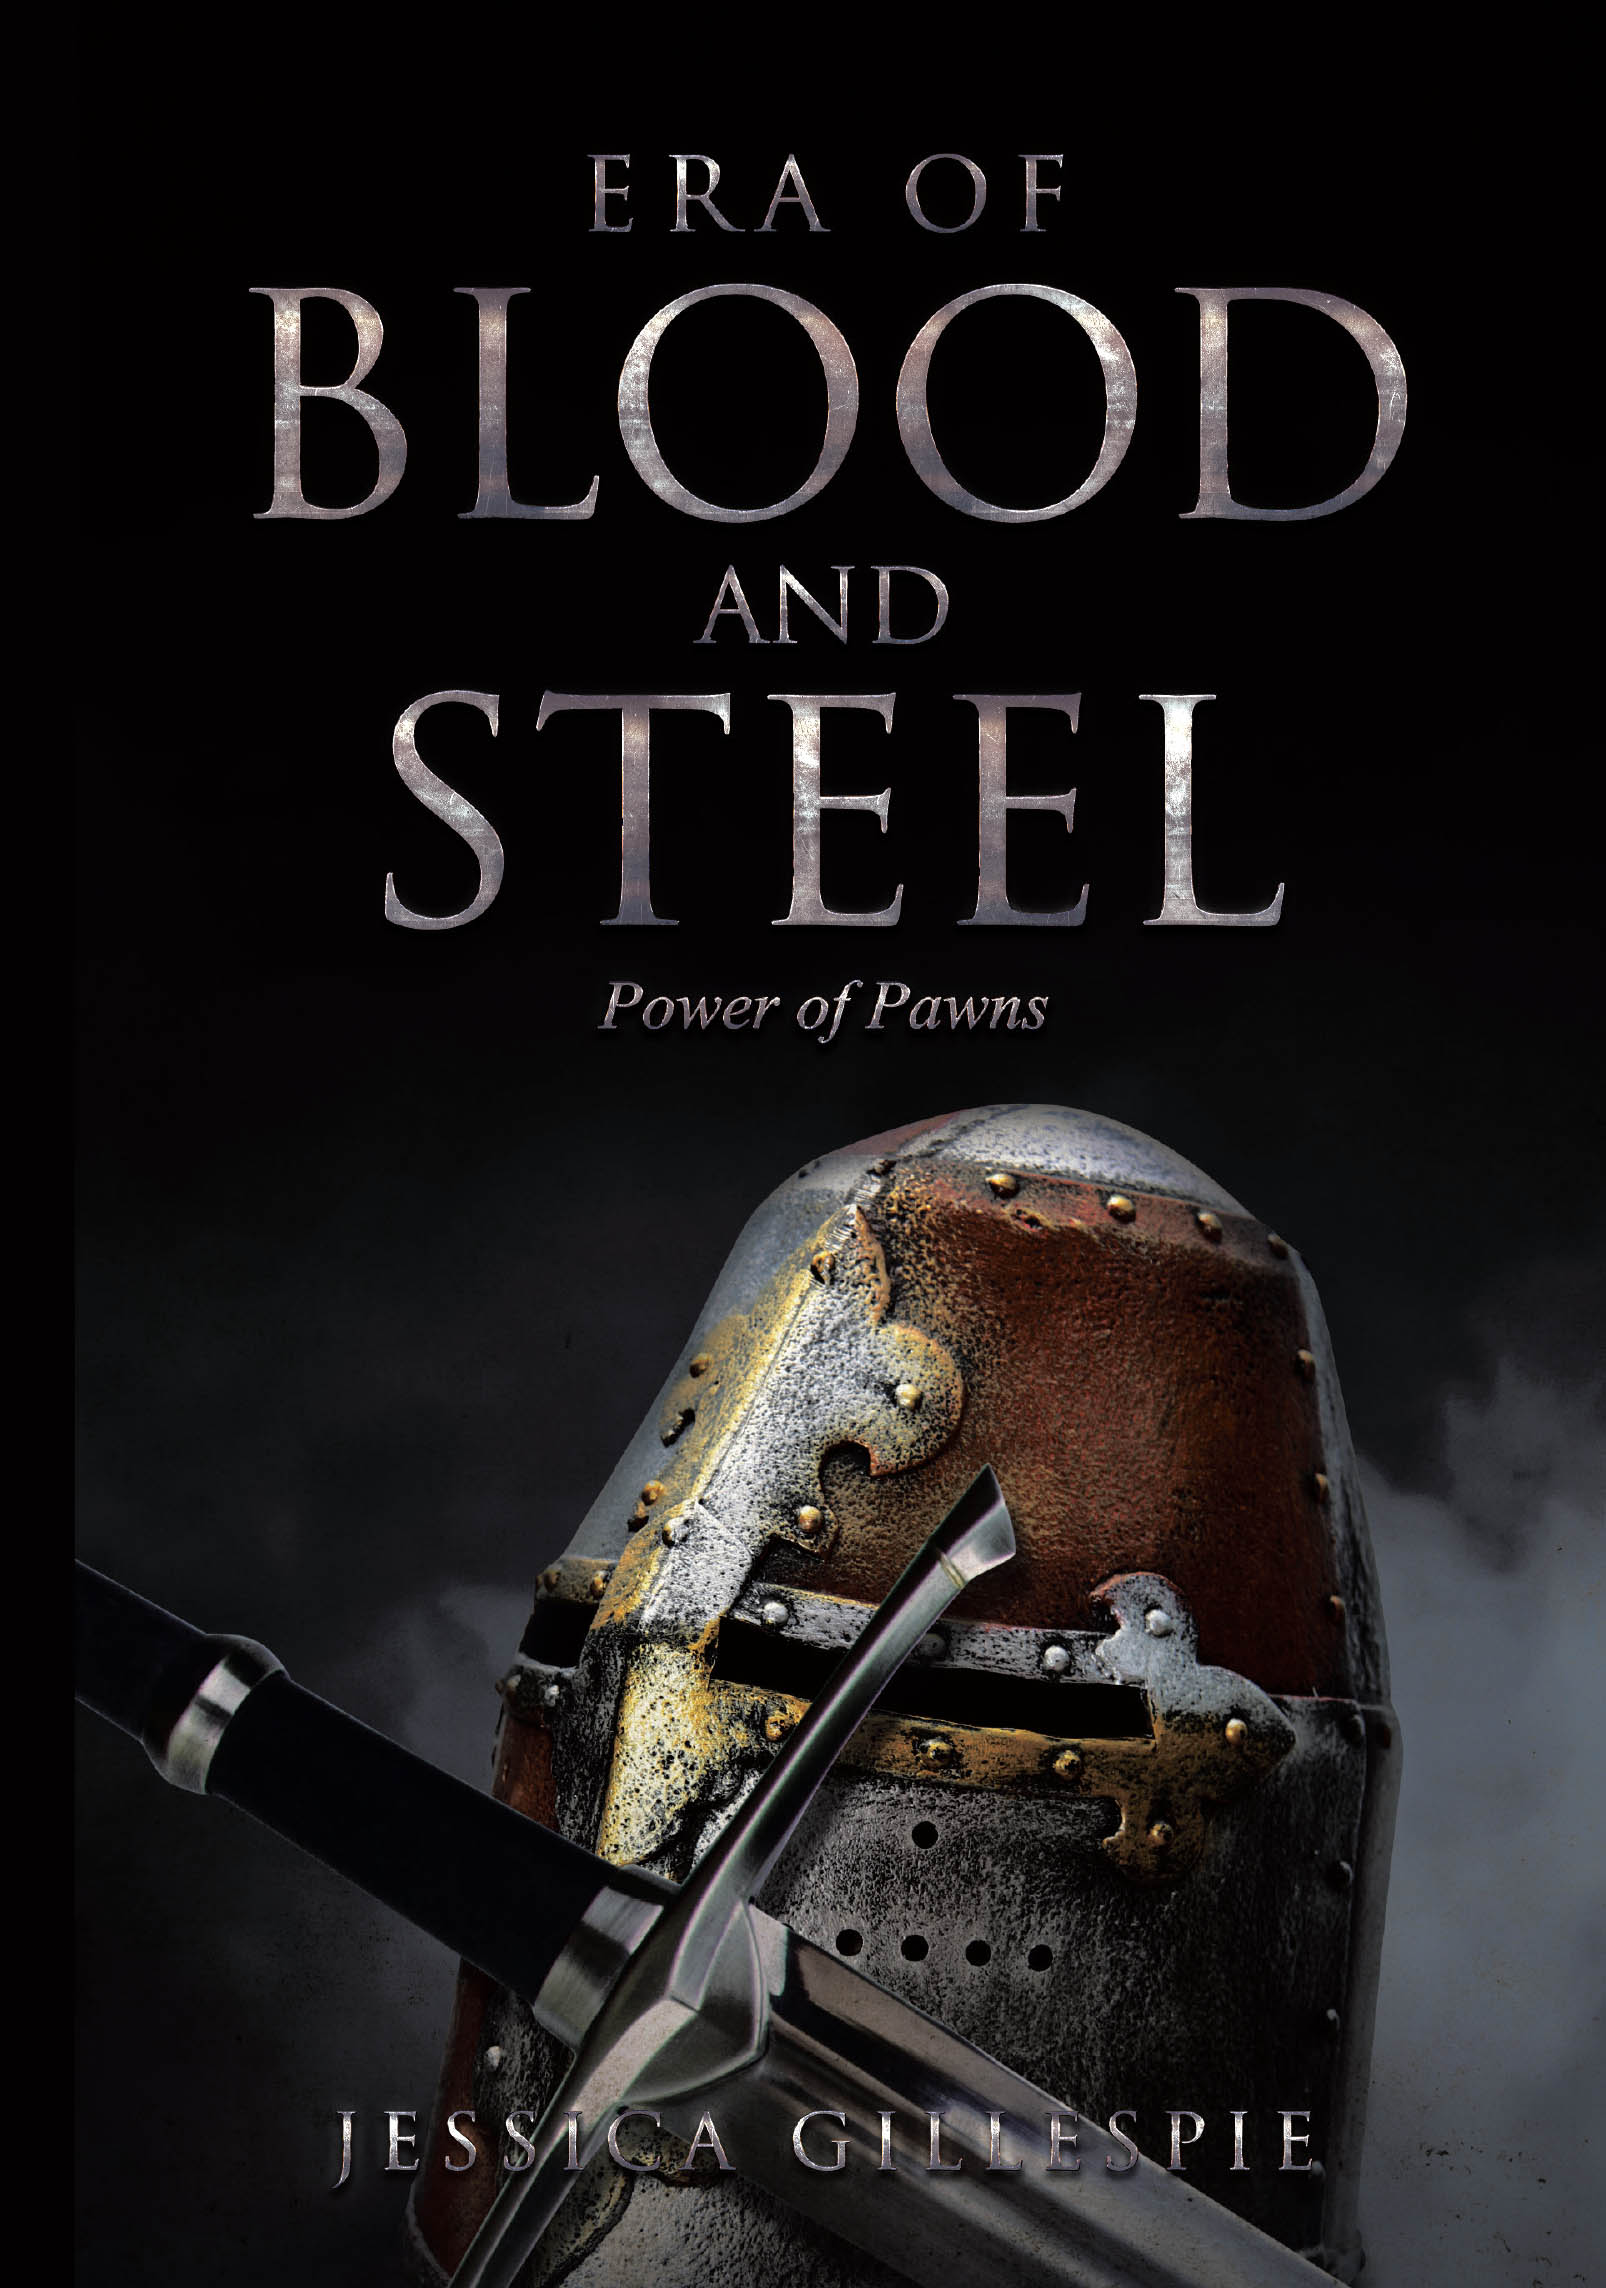 Author Jessica Gillespie’s New Book, "Era of Blood and Steel: Power of Pawns," is a Gripping Saga of Two Friends Who Are Pulled Apart by Fate and Reunited Enemies